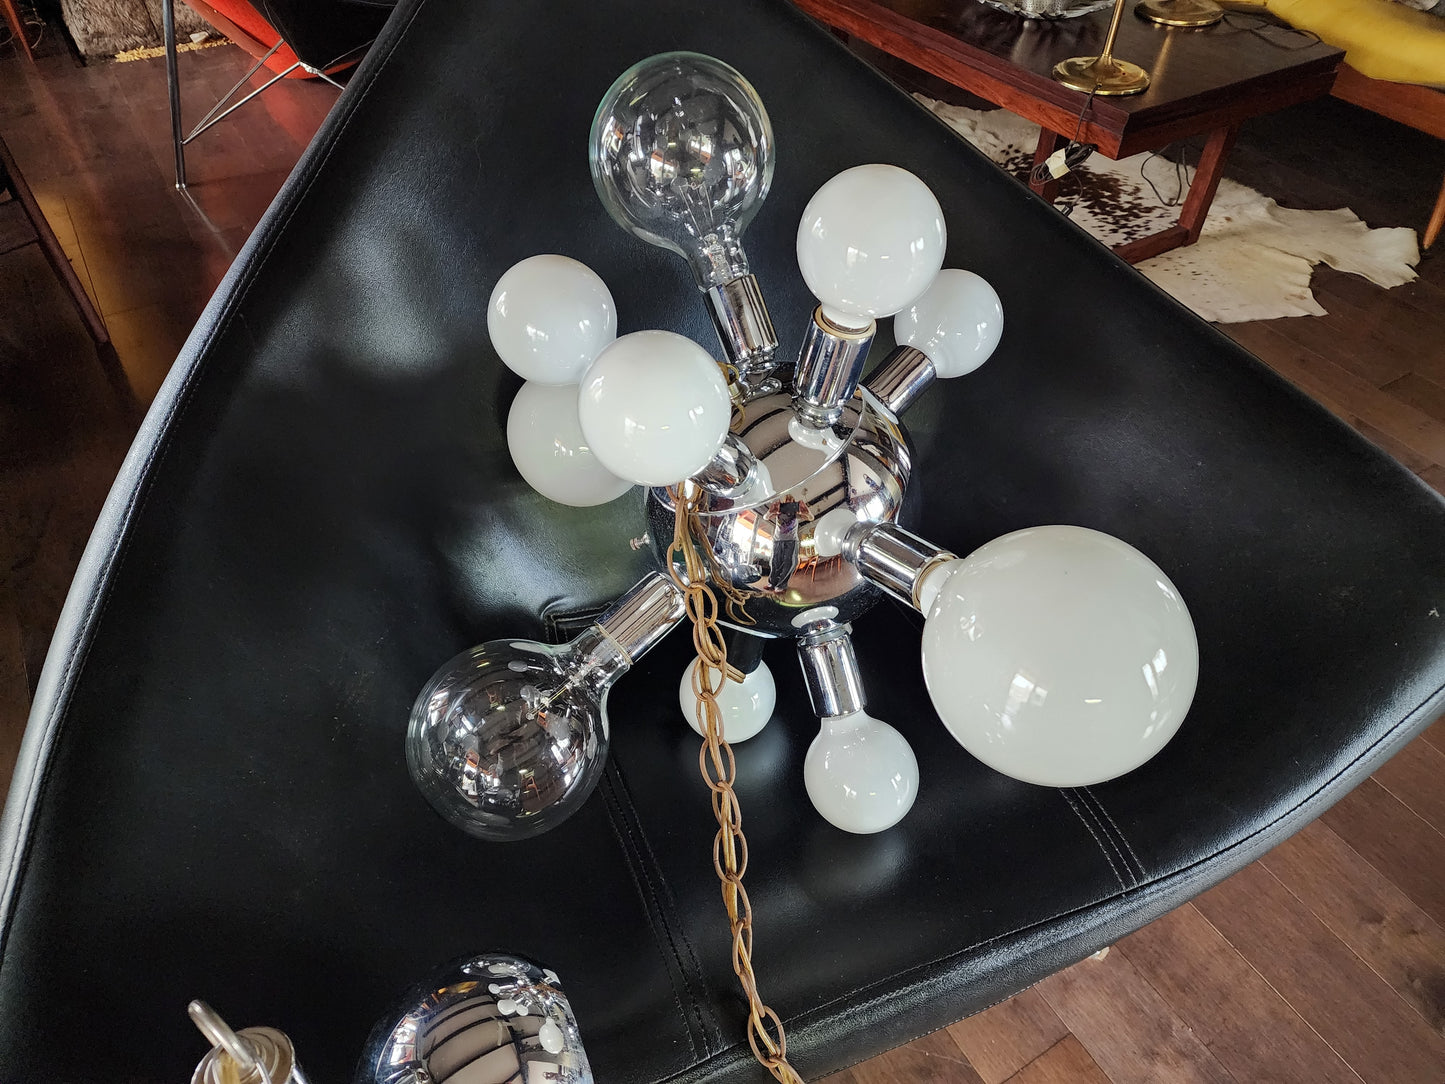 On Hold***Mid Century Modern Chrome and Glass Sputnik Ceiling Chandelier with 12 lights, Space Age